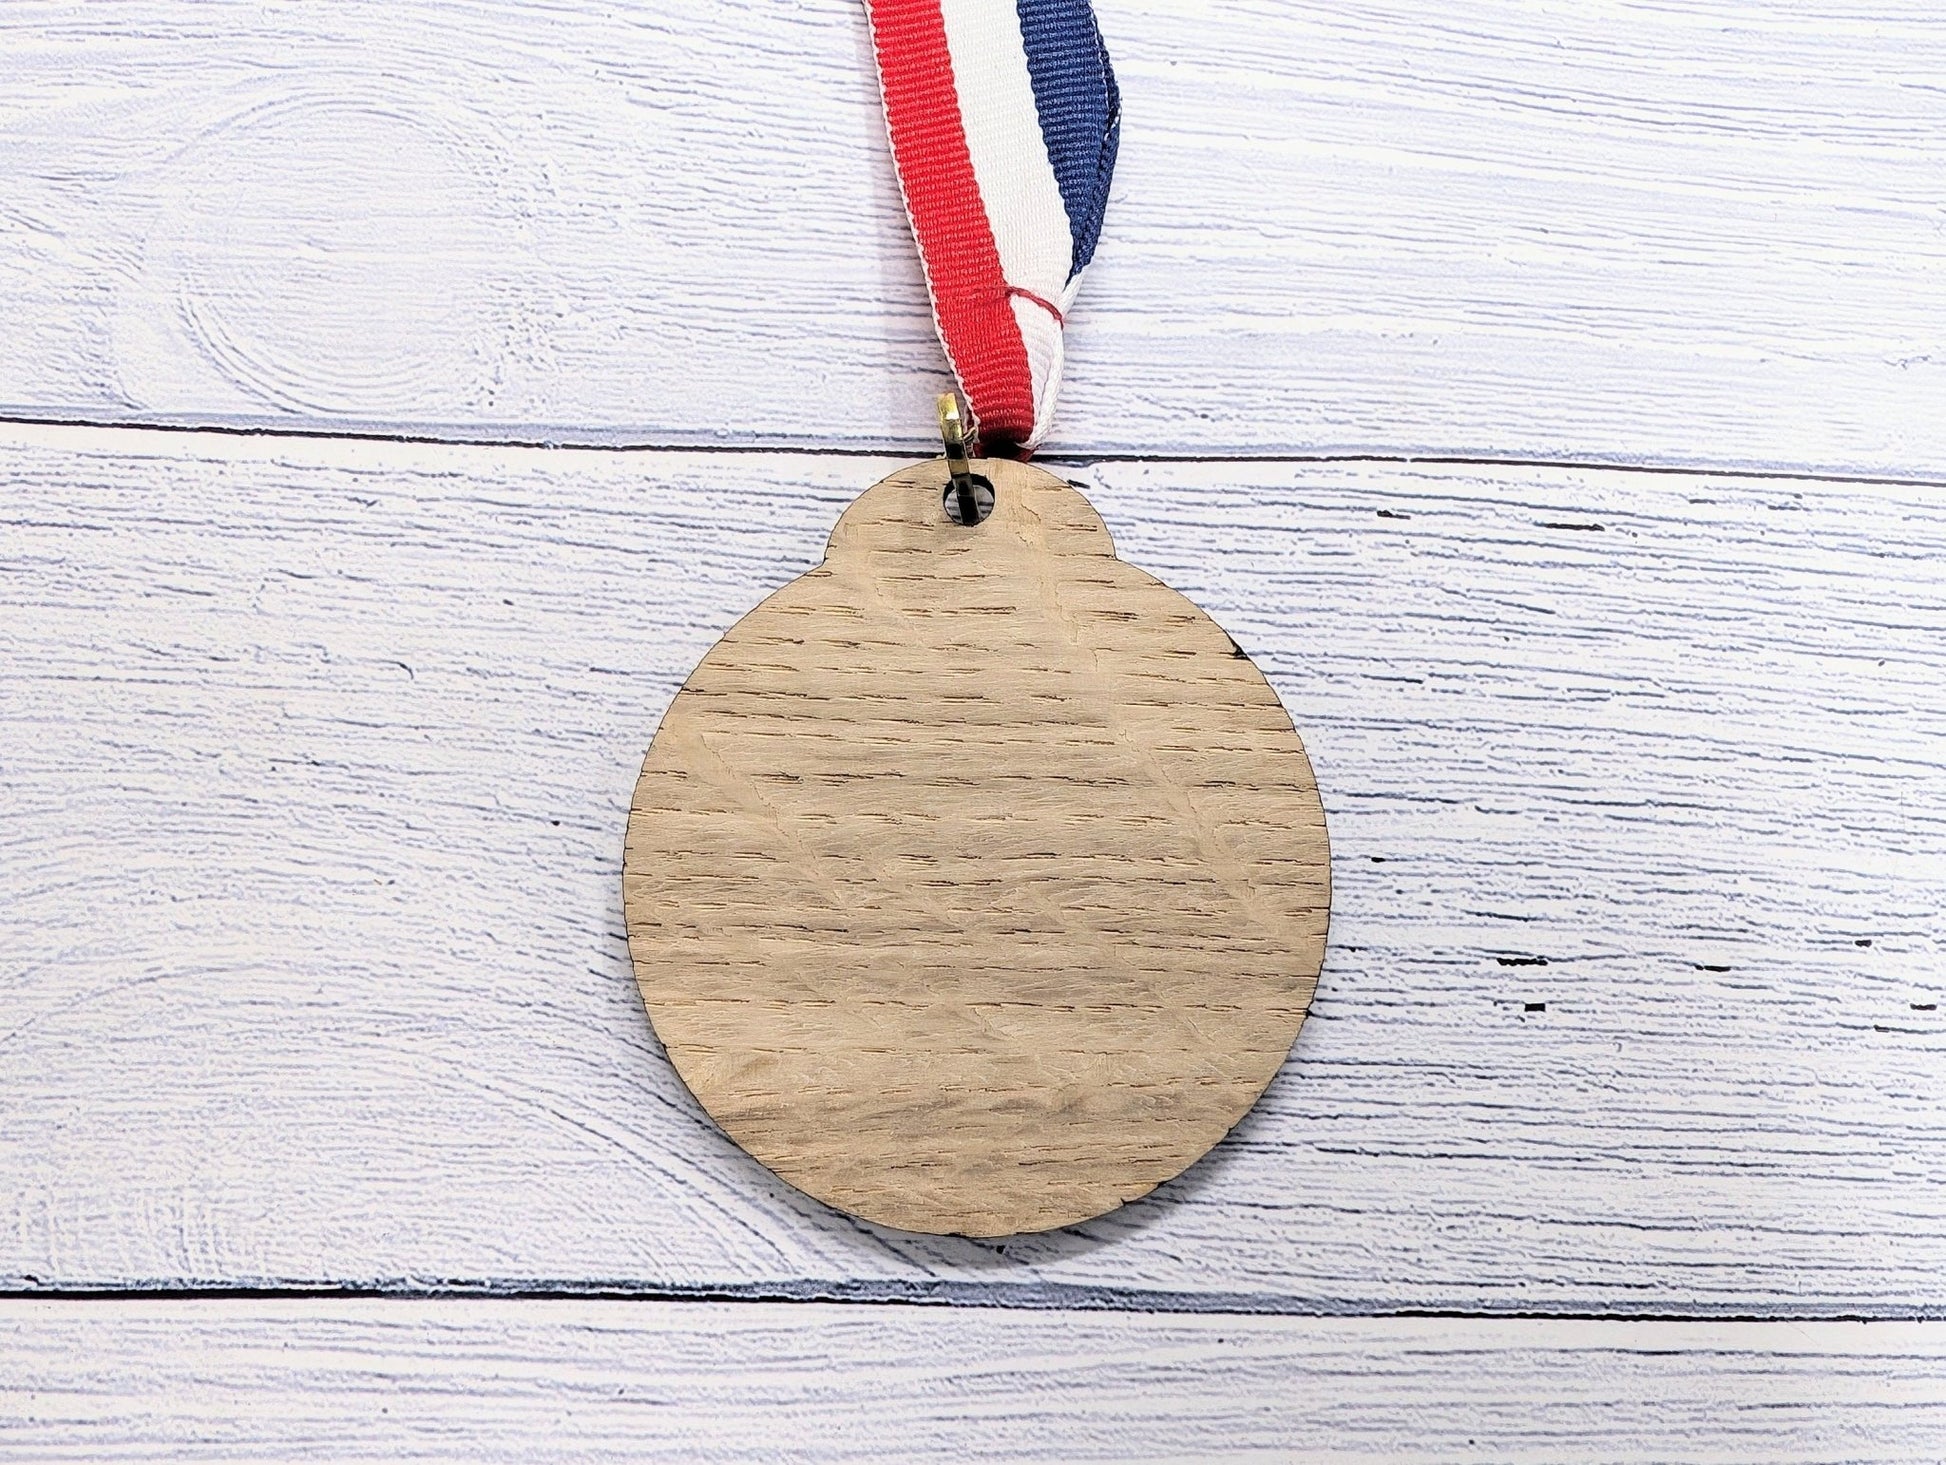 Custom Football-Themed Wooden Medals - Personalised Team Recognition - CherryGroveCraft